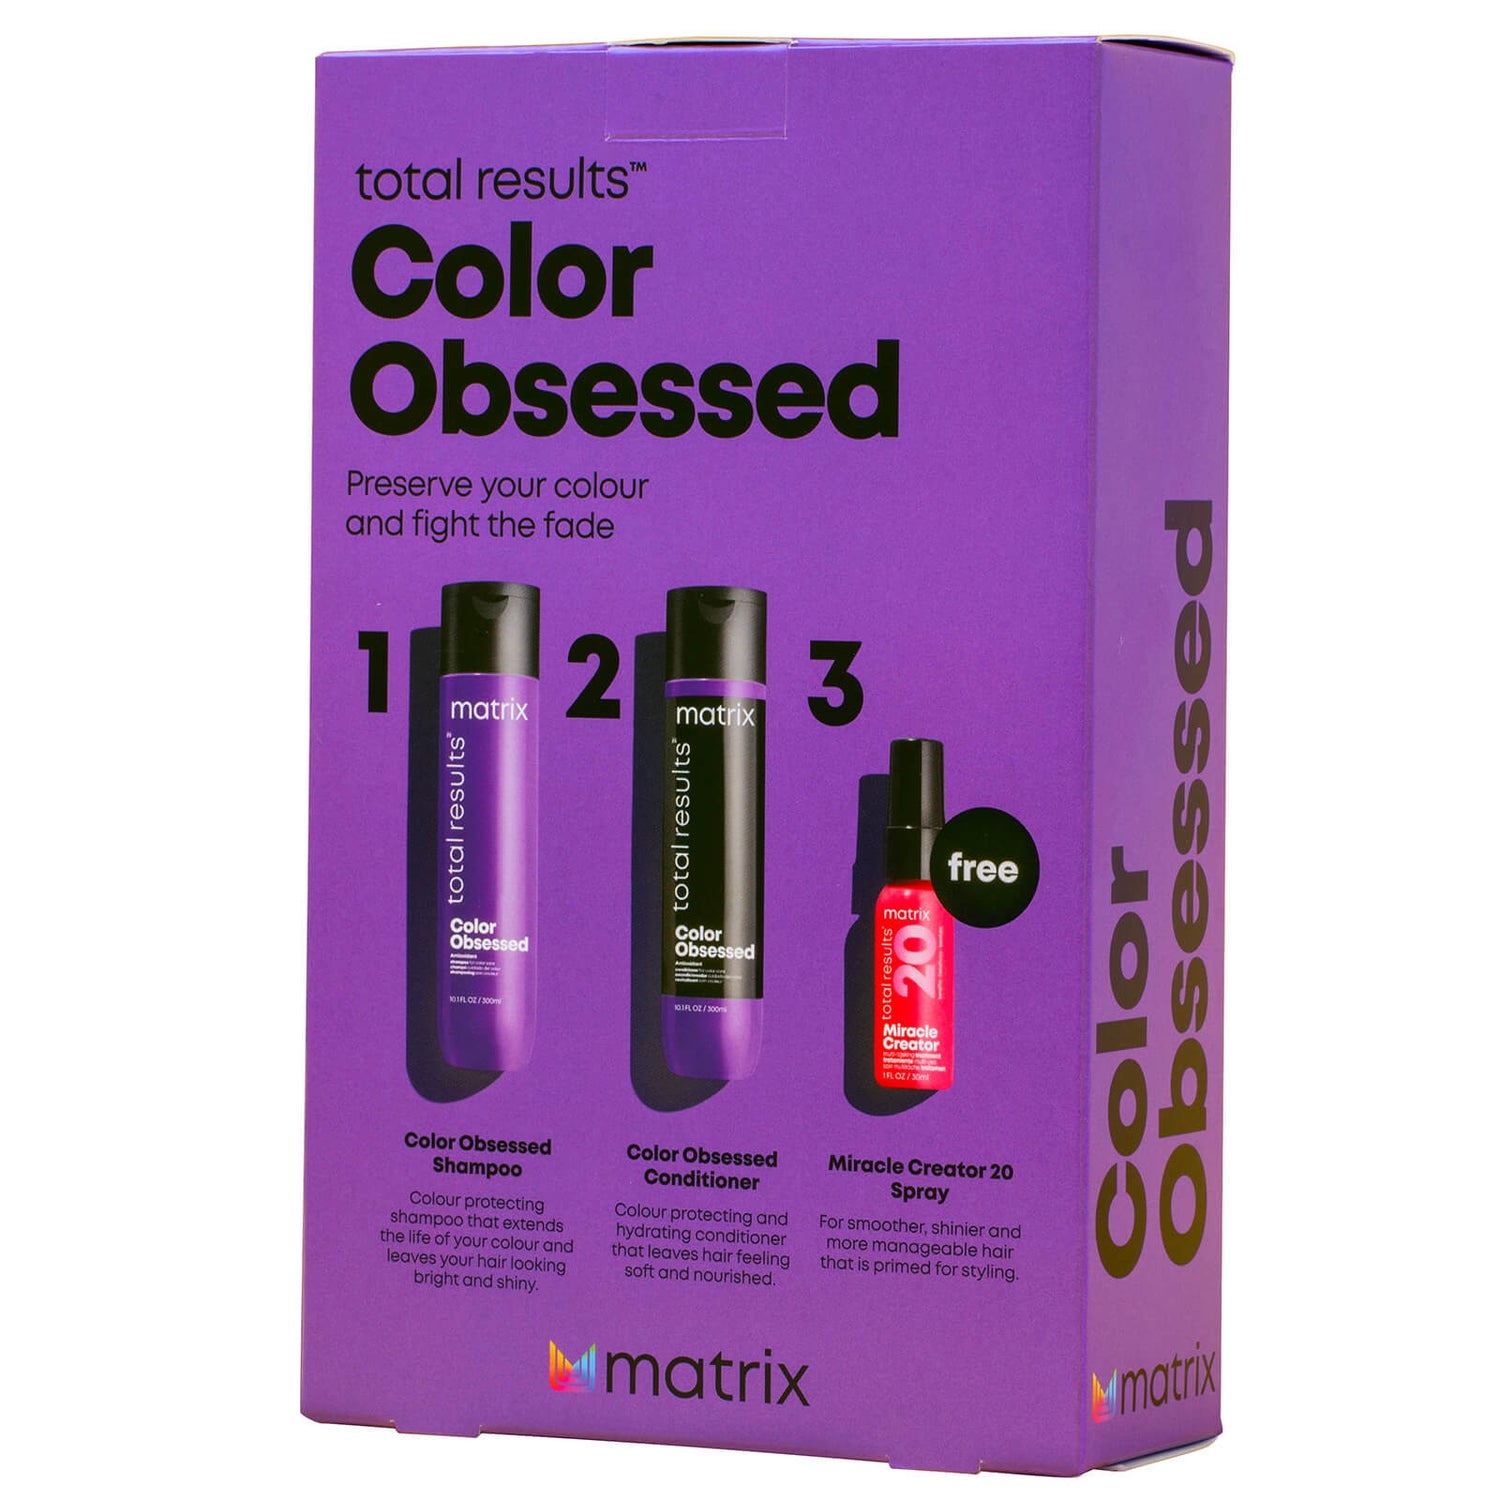 Matrix Total Results Colour Obsessed Gift Set (Worth £24.50)